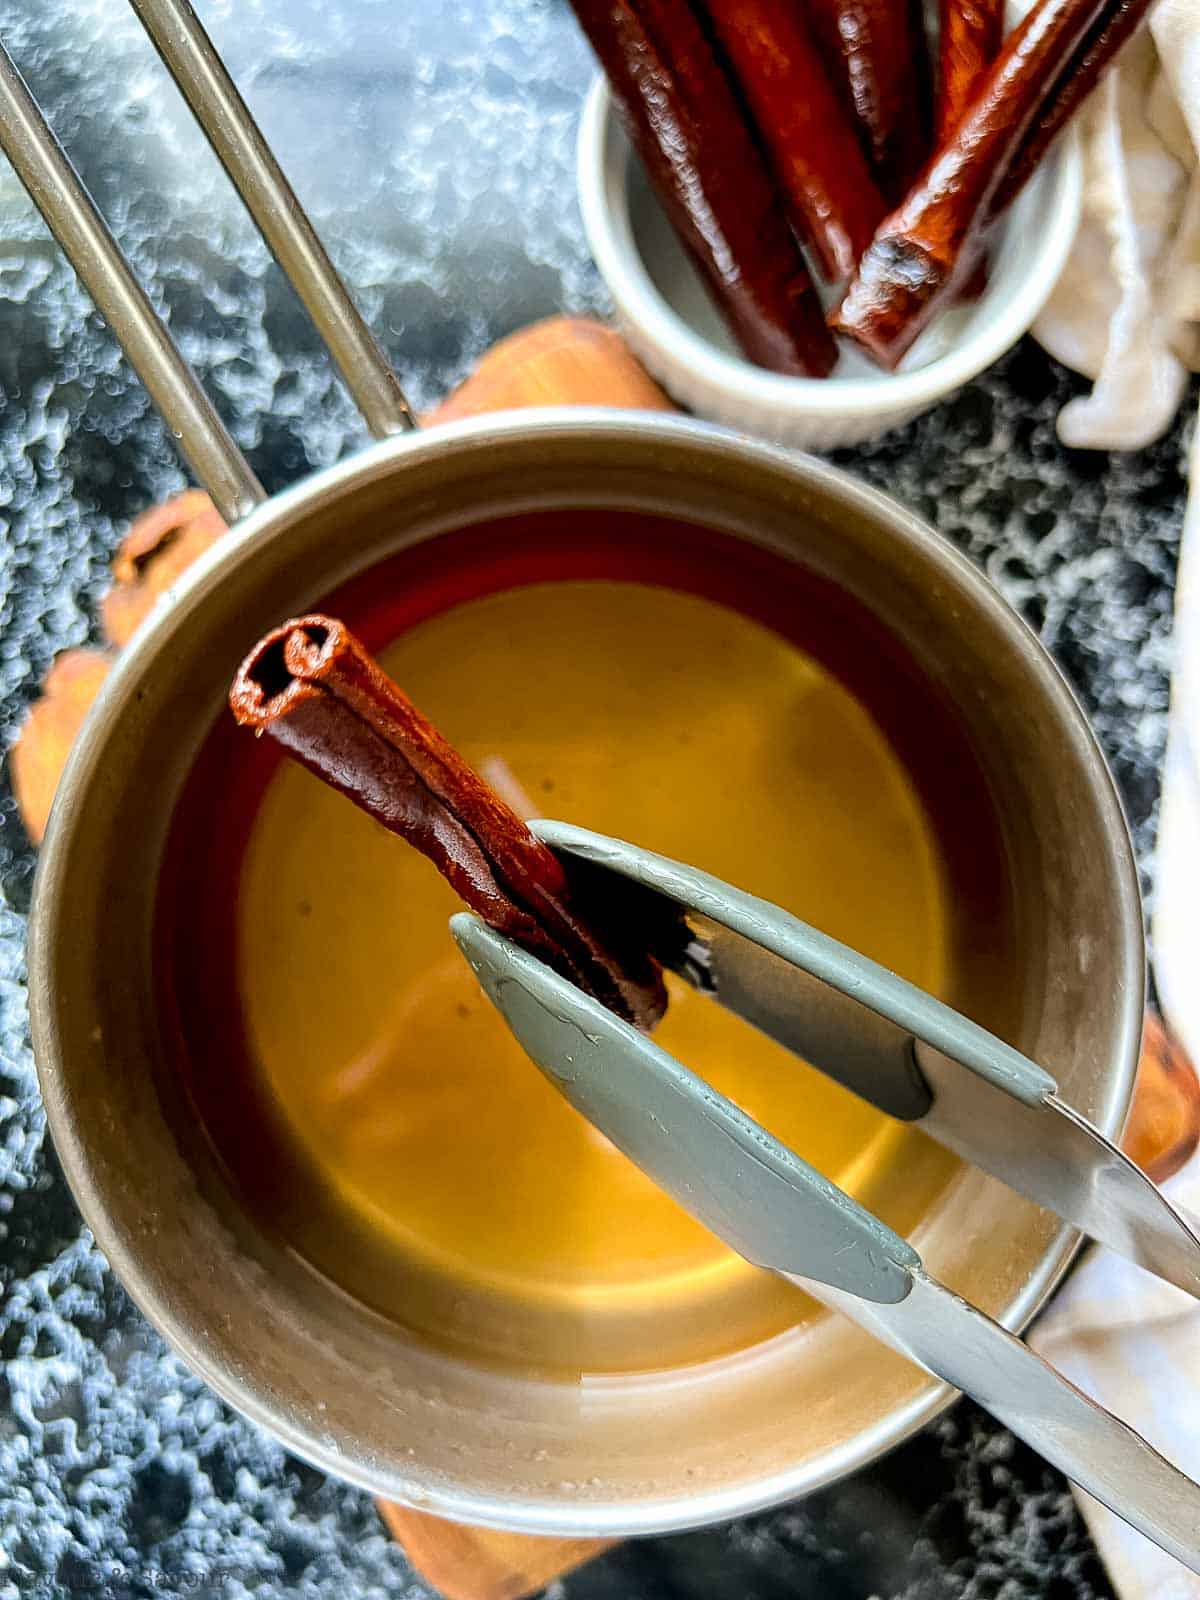 Removing a cinnamon stick from cinnamon simple syrup with tongs.